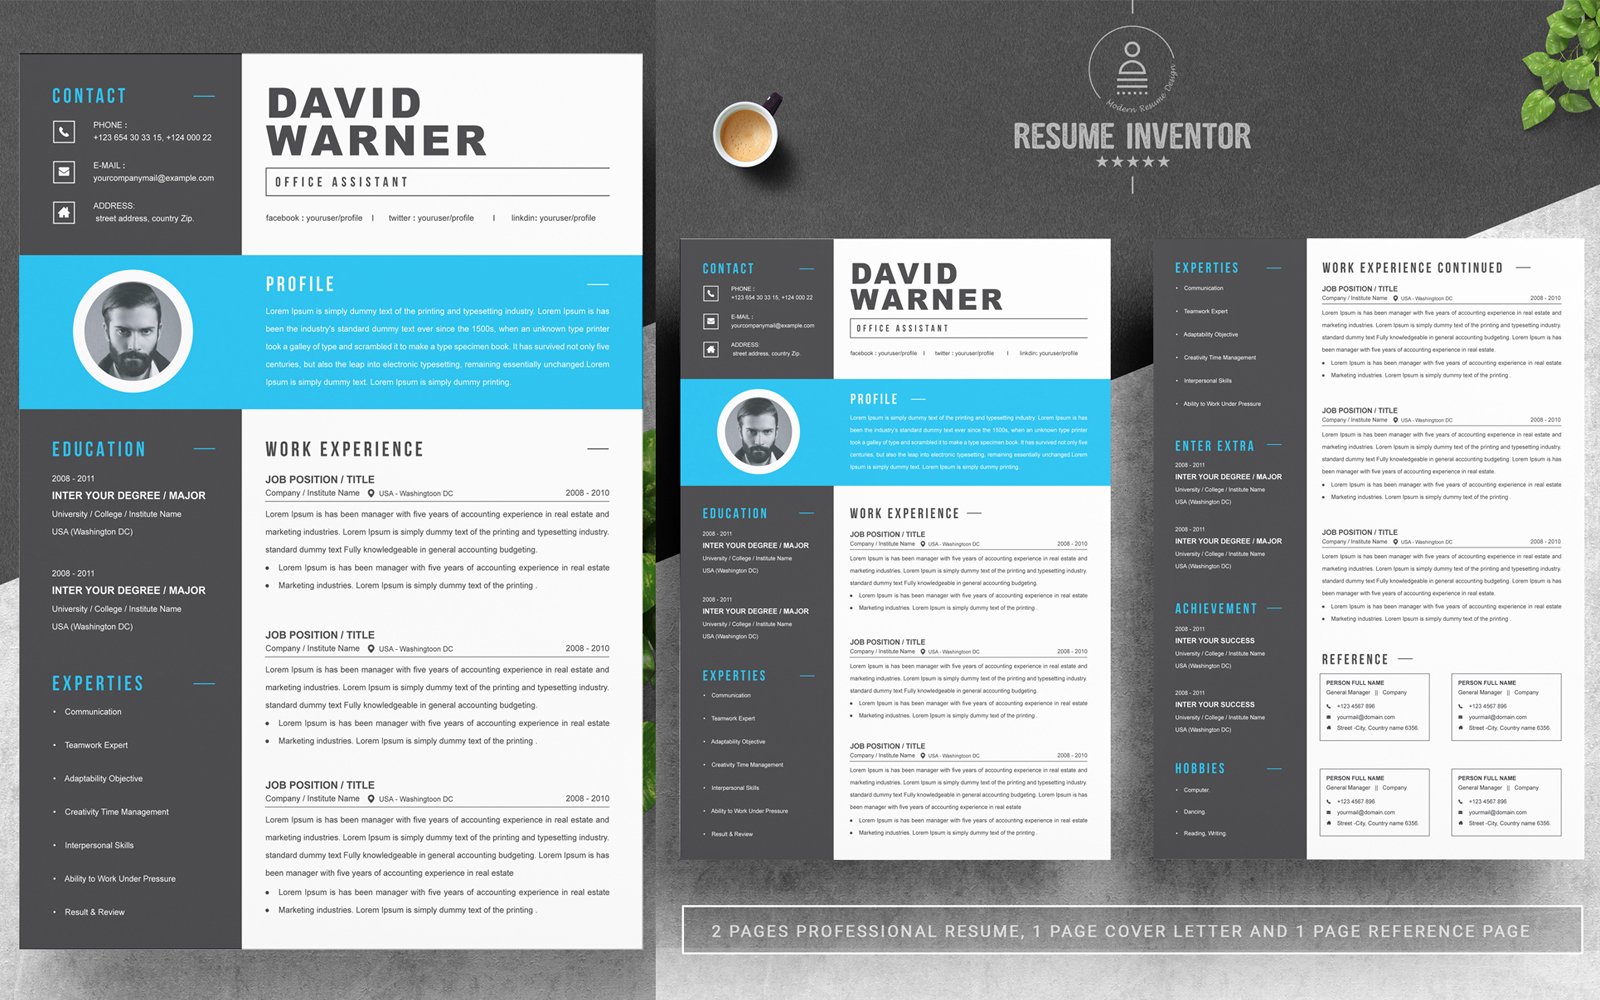 Template #203332 Resume Template Webdesign Template - Logo template Preview